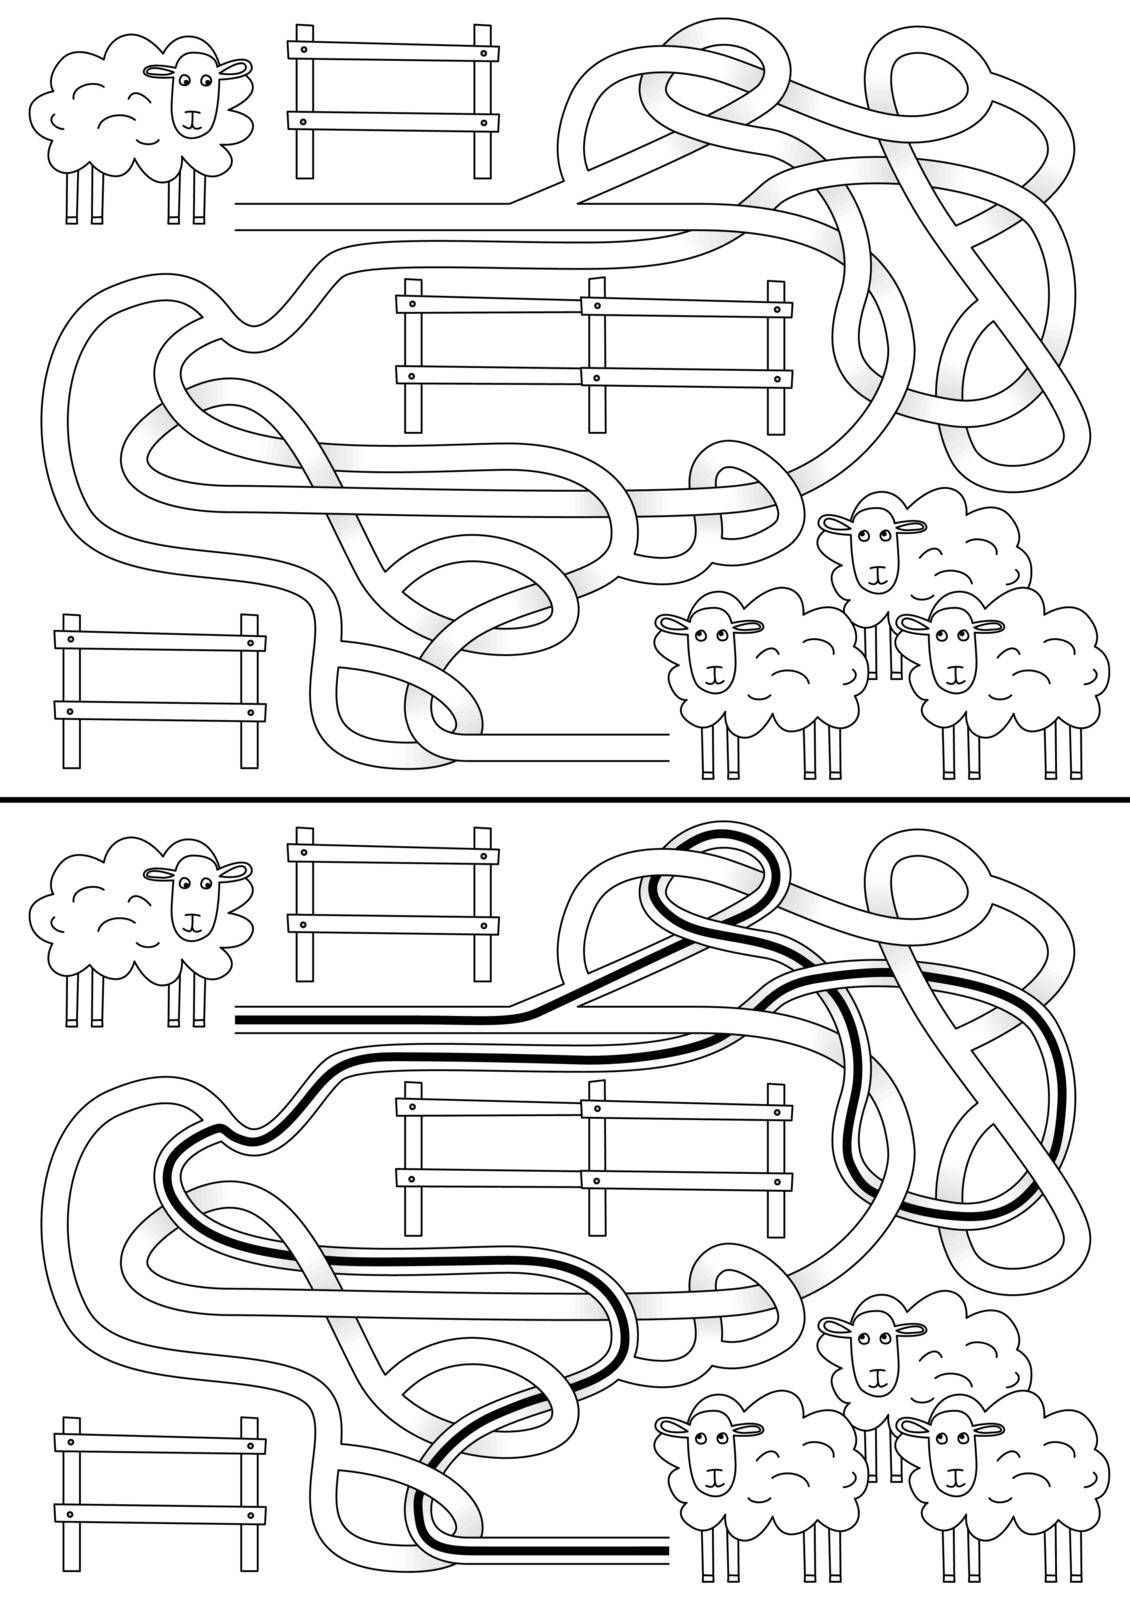 Sheep maze for kids with a solution in black and white